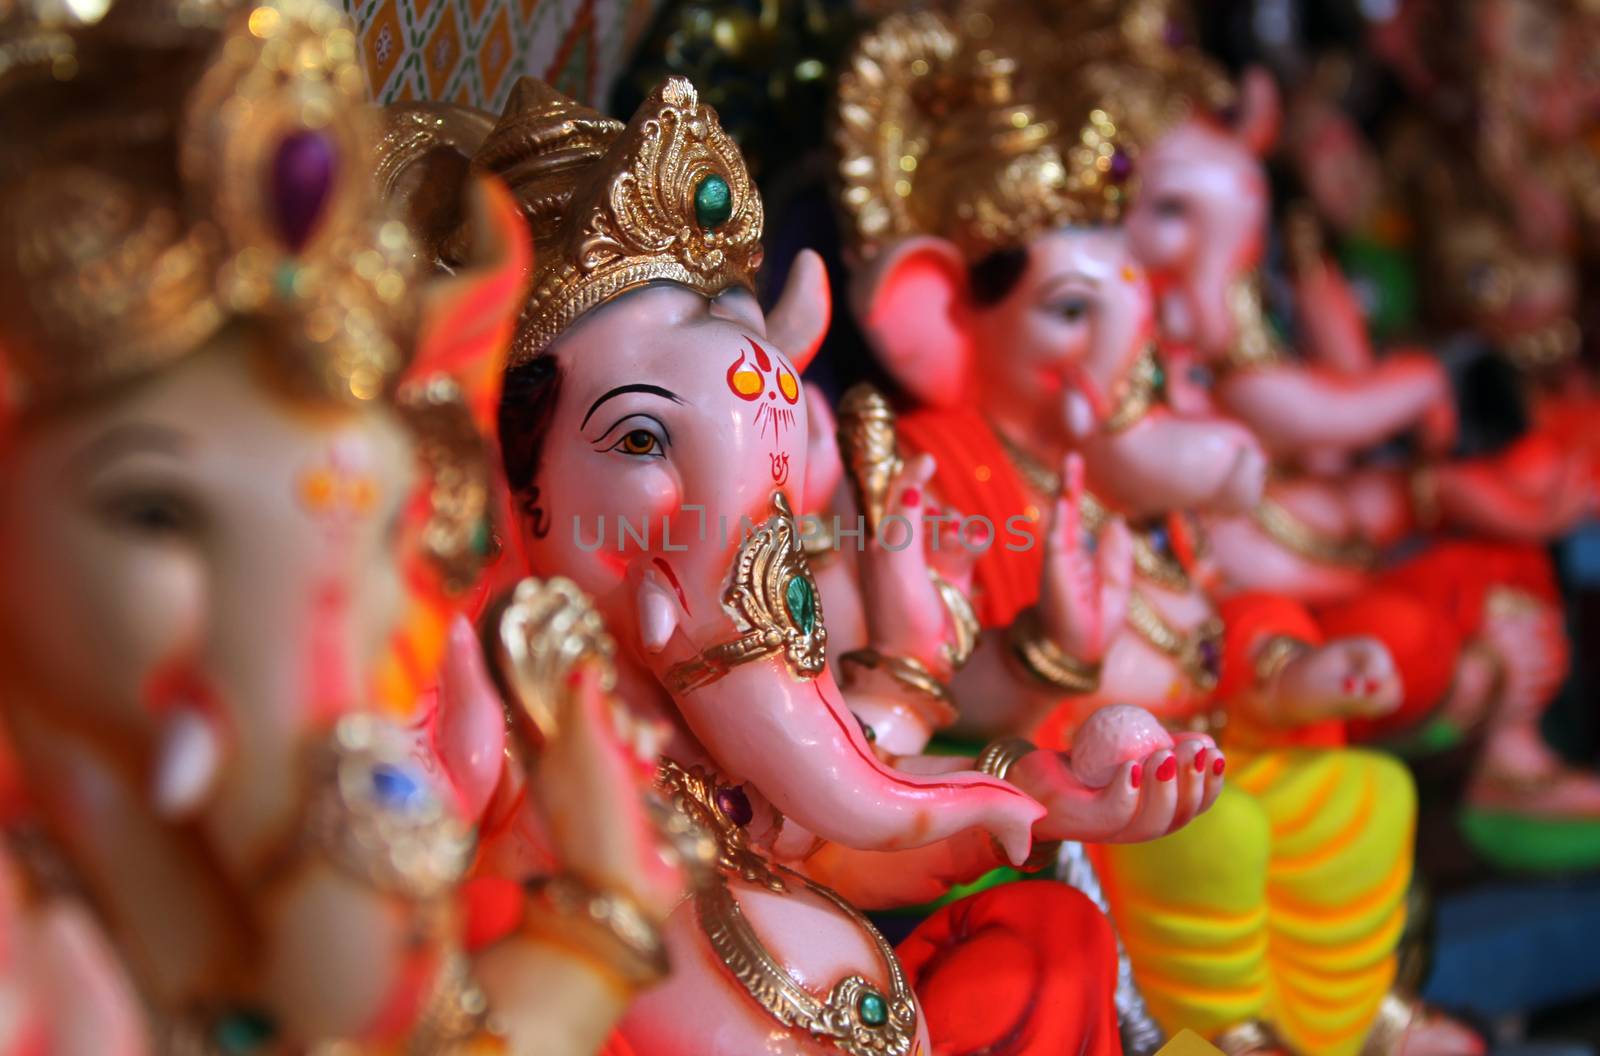 Beautiful idols of Lord Ganesha for sale in a Shop during Ganesh festival in India.